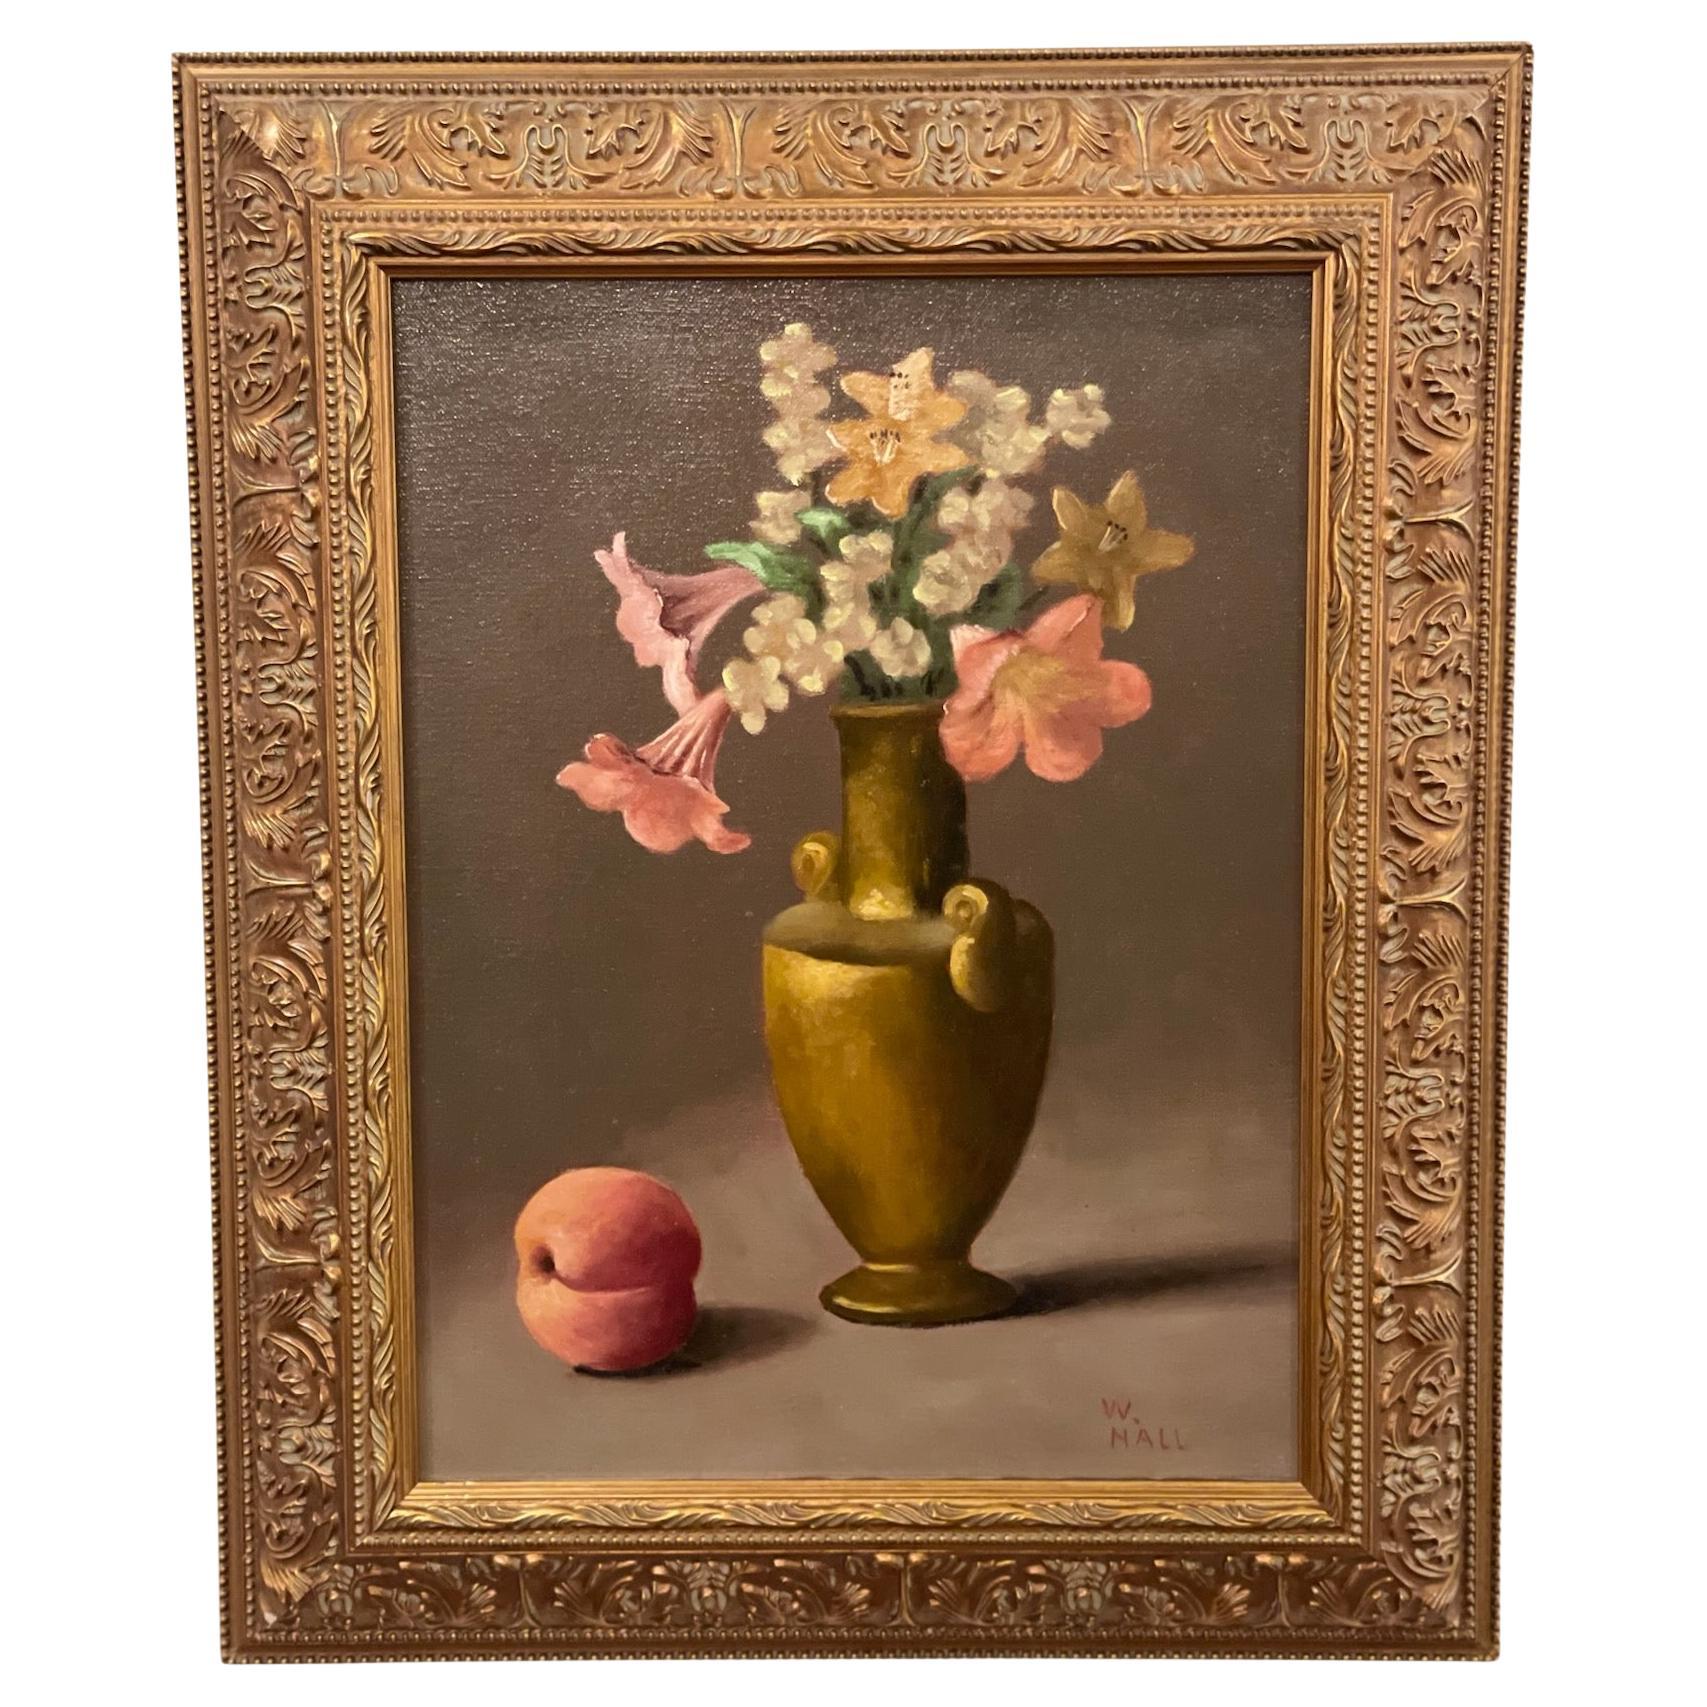 Original Oil Painting Floral Still Life with a Peach Gold Frame Signed by Artist